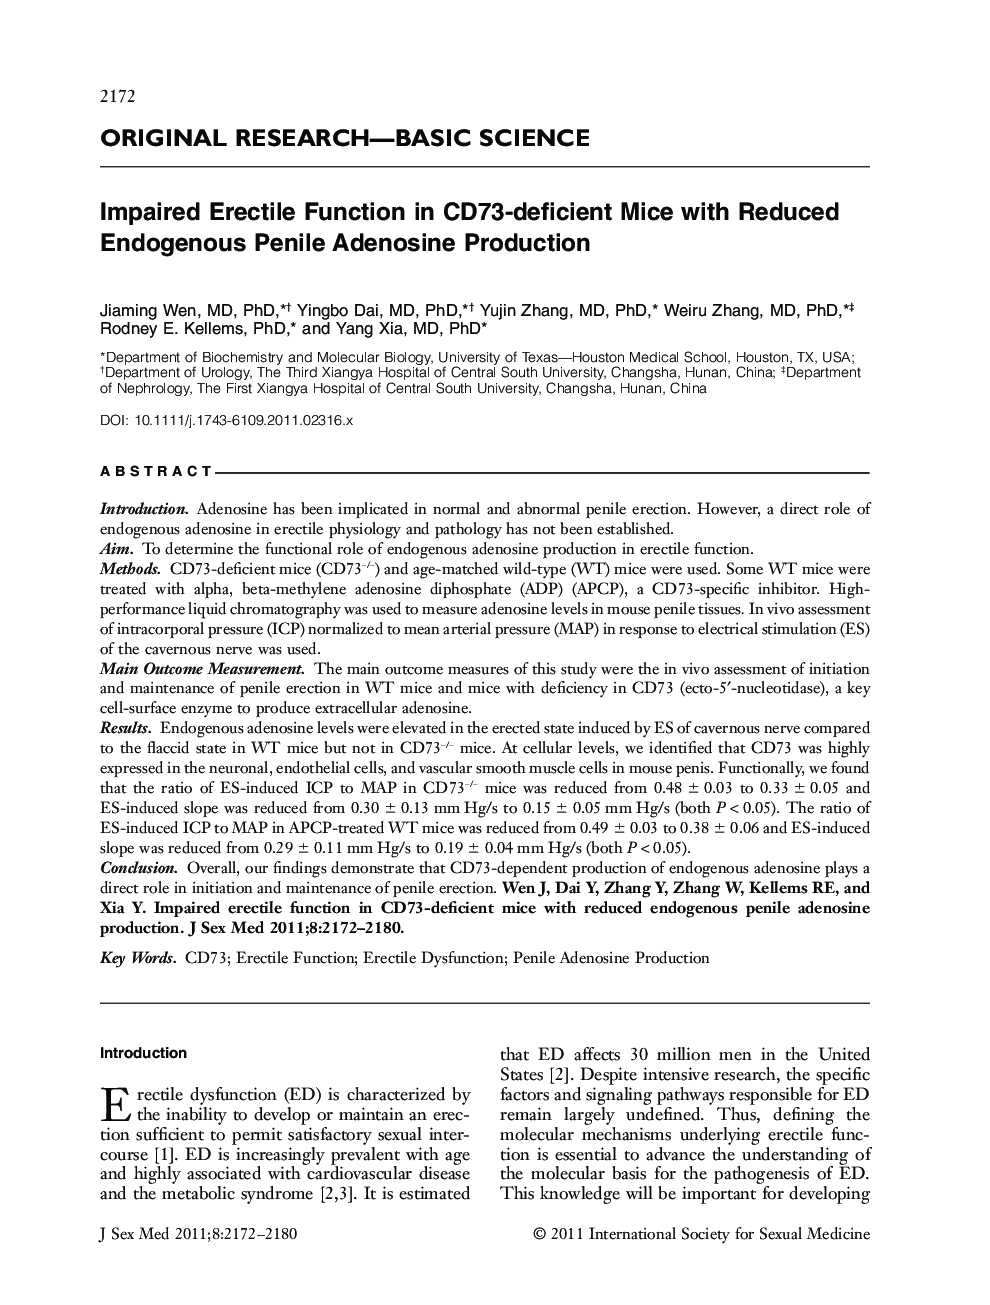 Impaired Erectile Function in CD73âdeficient Mice with Reduced Endogenous Penile Adenosine Production